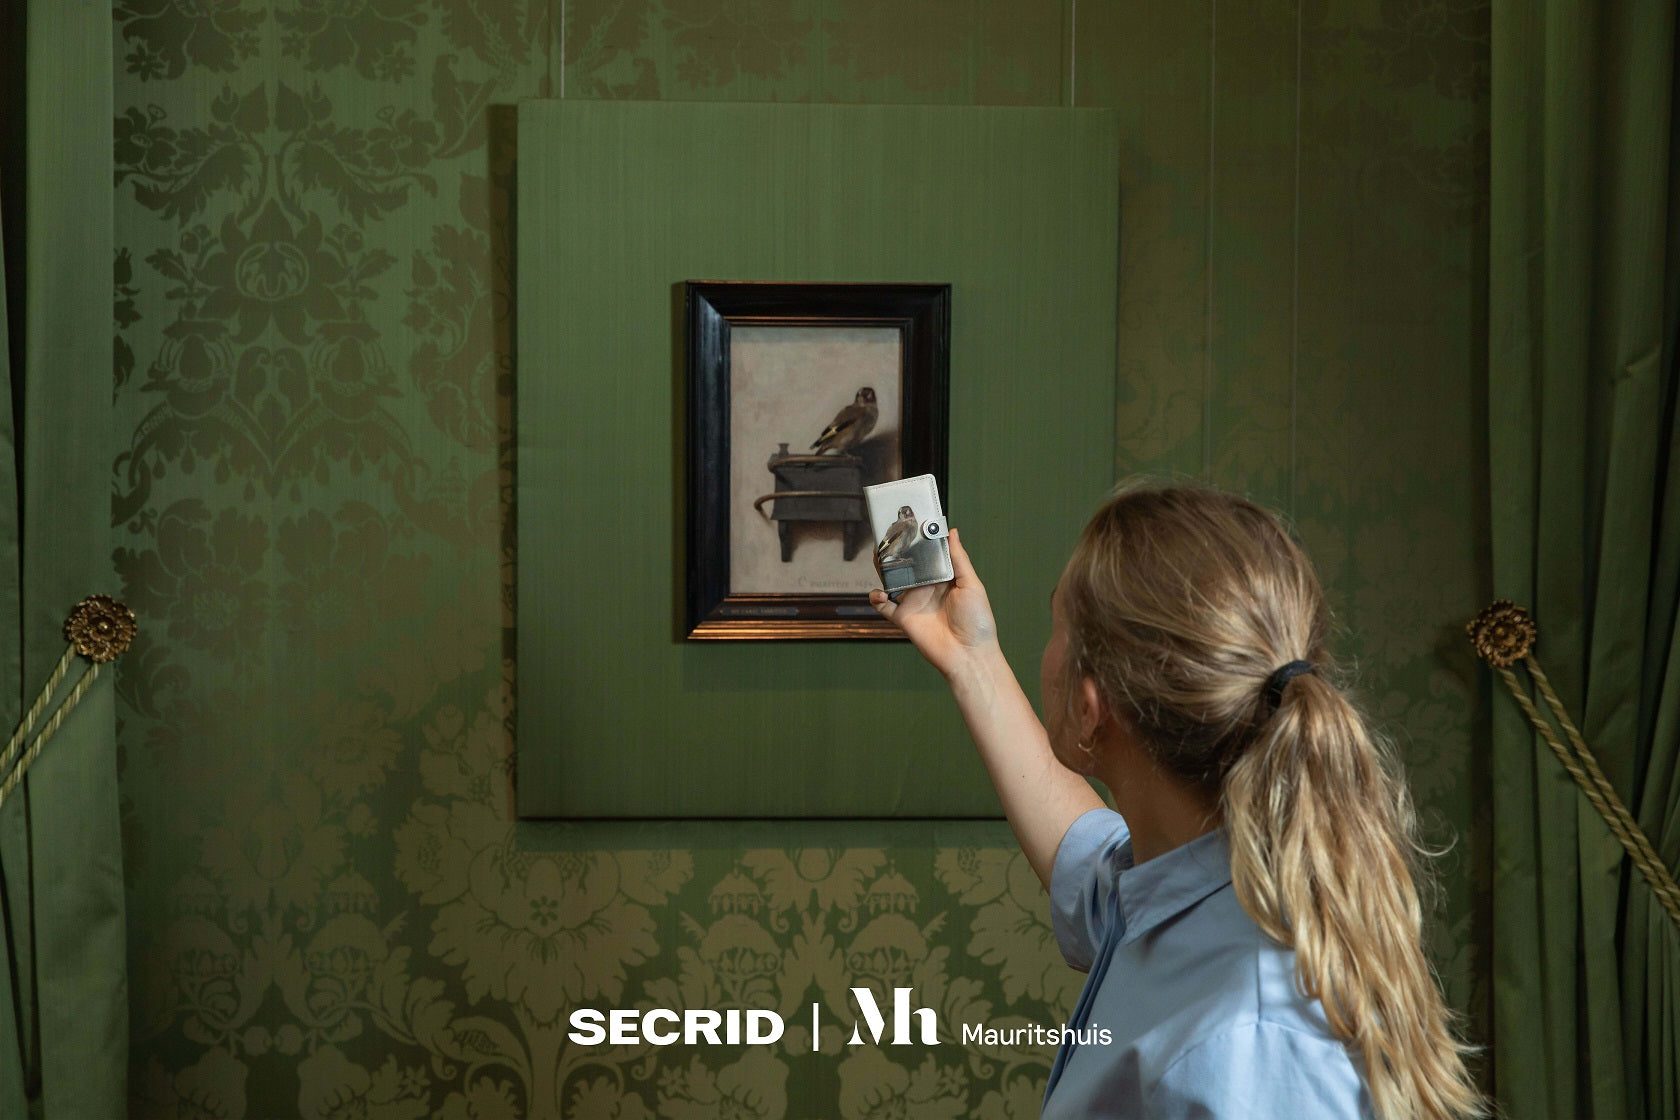 The Secrid Art Collection - Mauritshuis